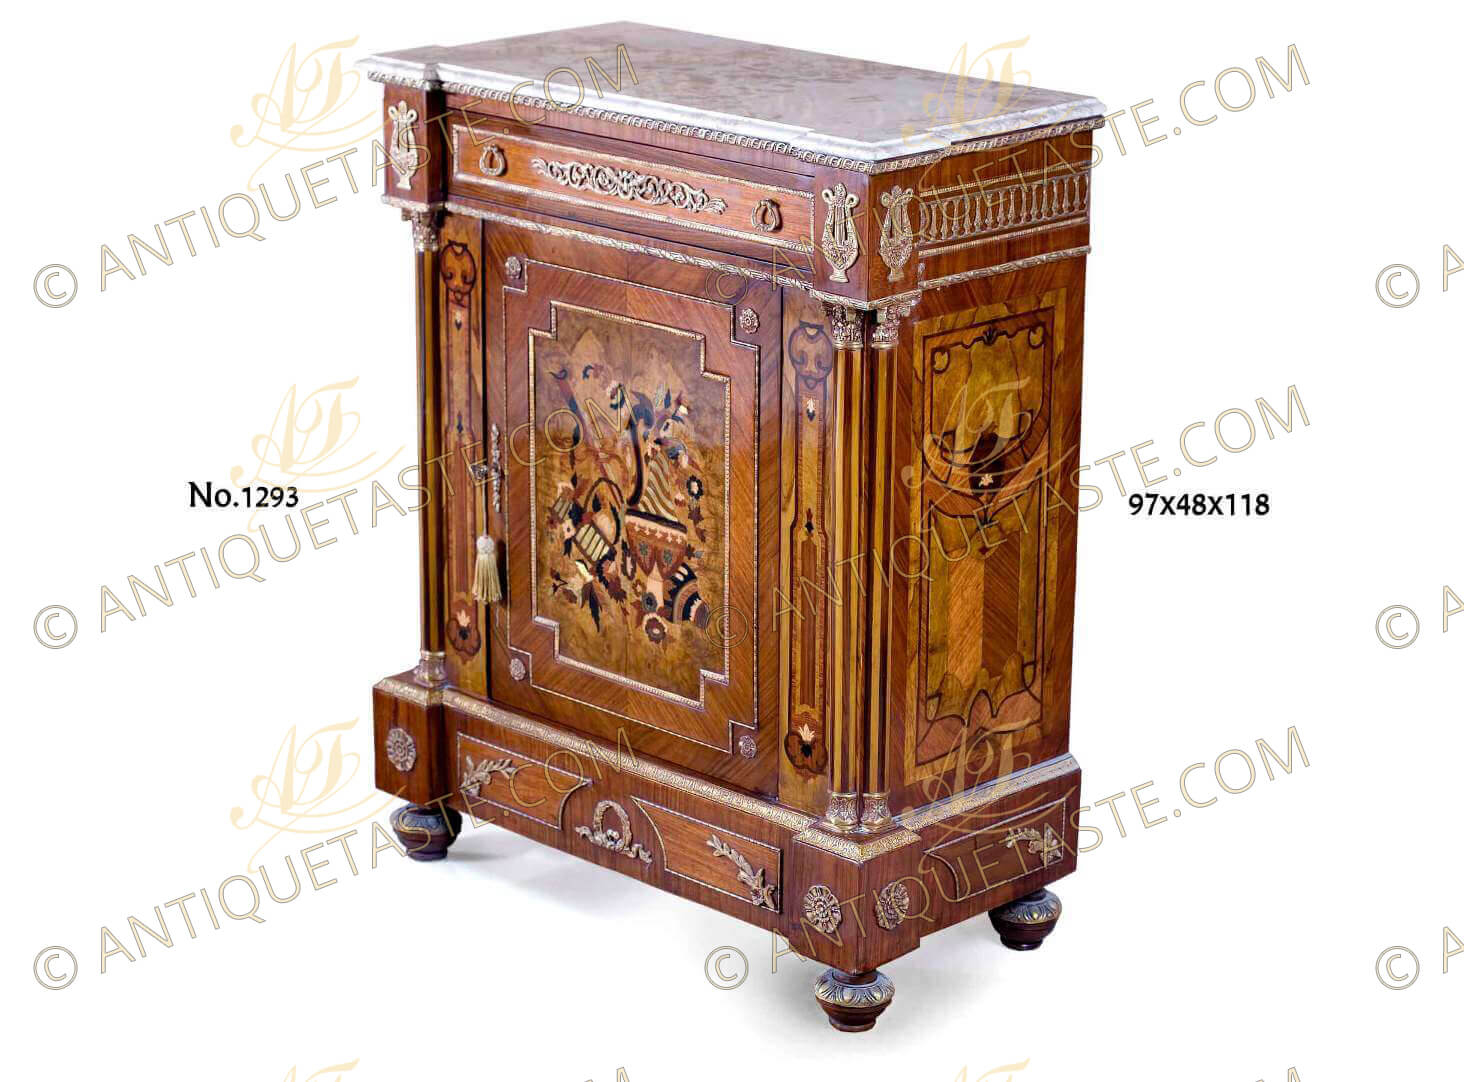 Late French Louis XVI Neoclassical ormolu-mounted marquetry and veneer inlaid Baroque Side Cabinet